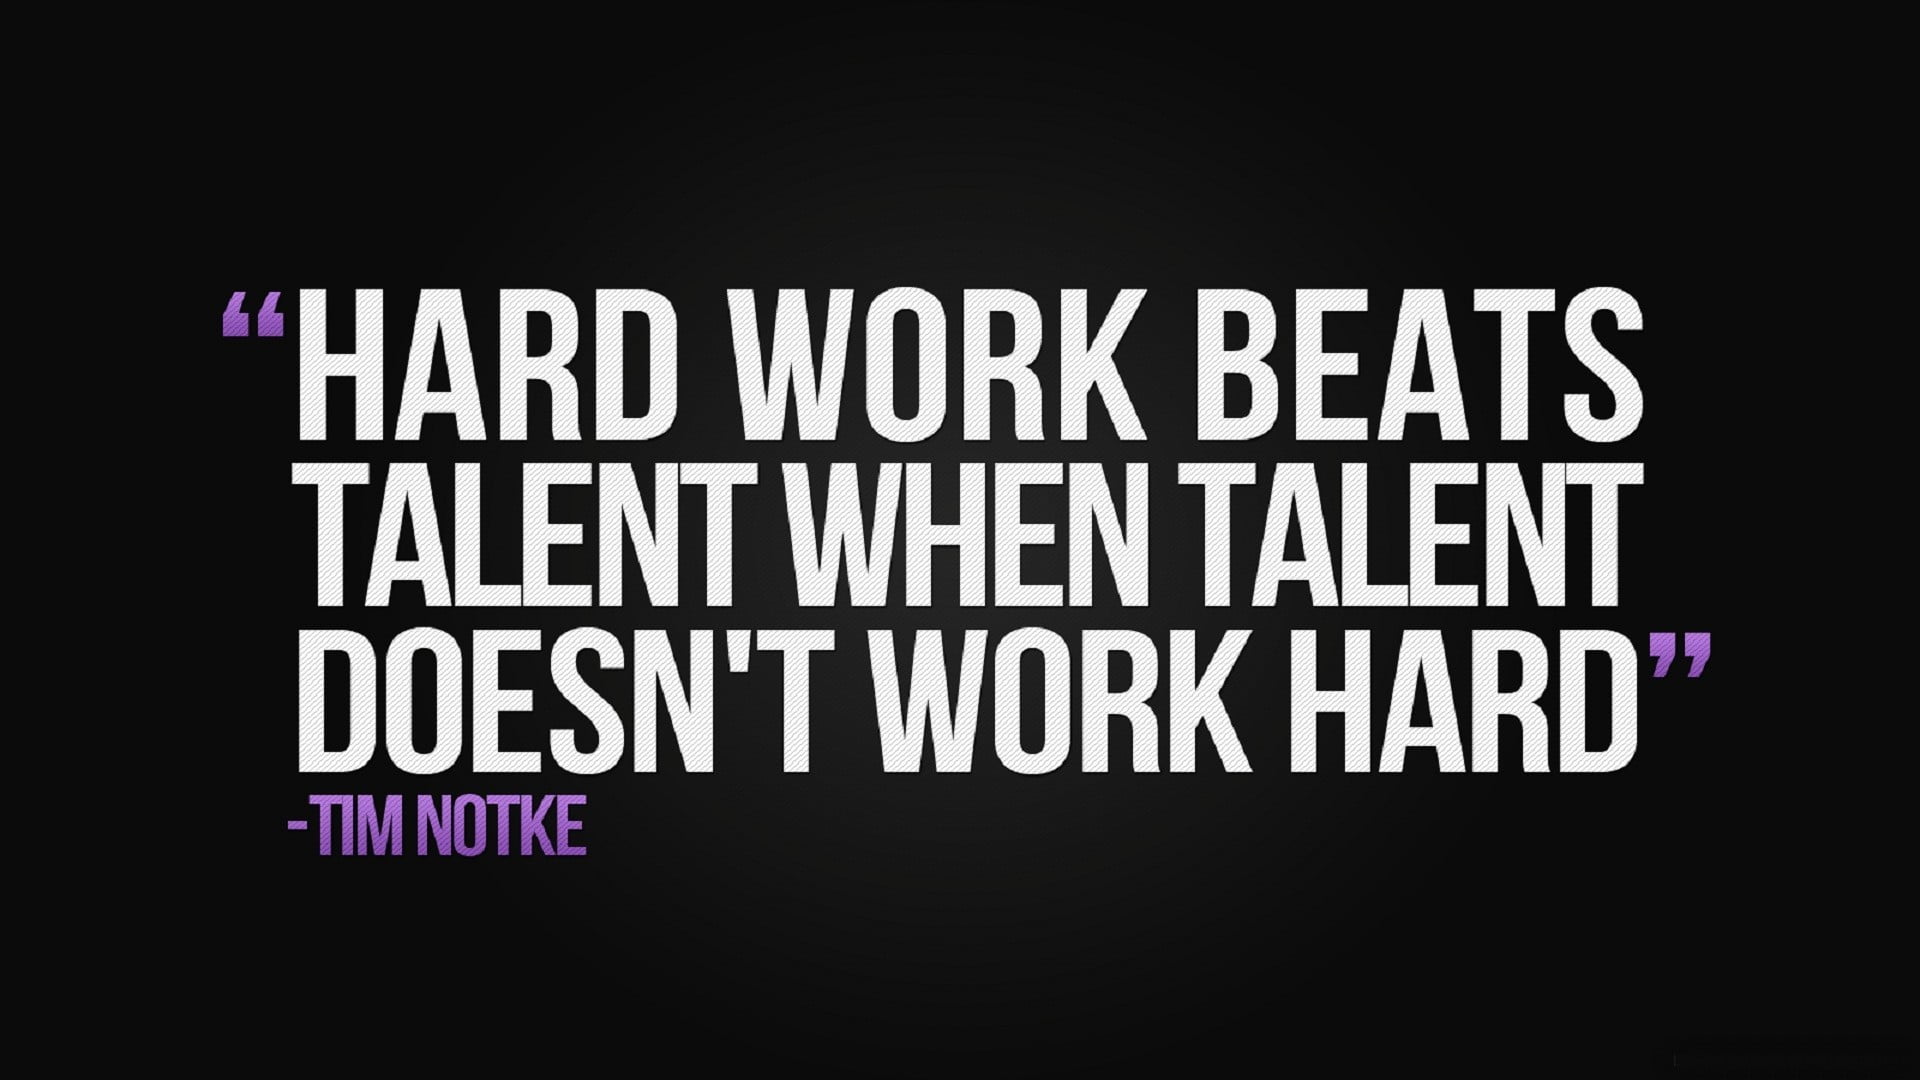 Hard Work Beats talent When Talent doesn't work hard quote, quote